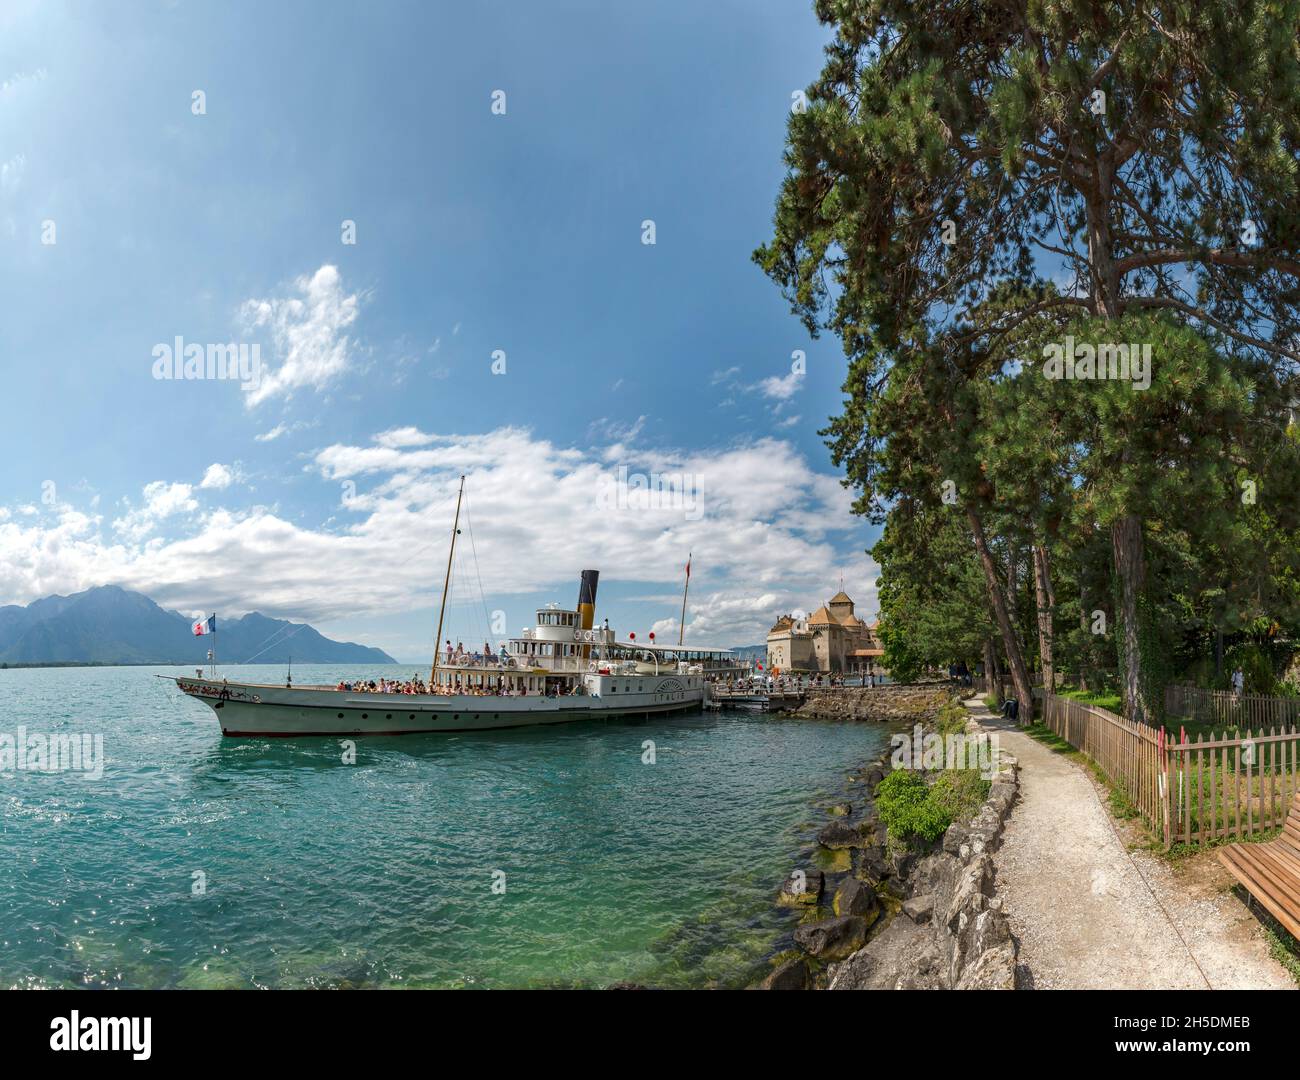 Chateau Chillon at Lac Léman,  round-trip boat *** Local Caption ***  Veytaux, Switzerland, castle, water, trees, summer, mountains, lake, people, shi Stock Photo